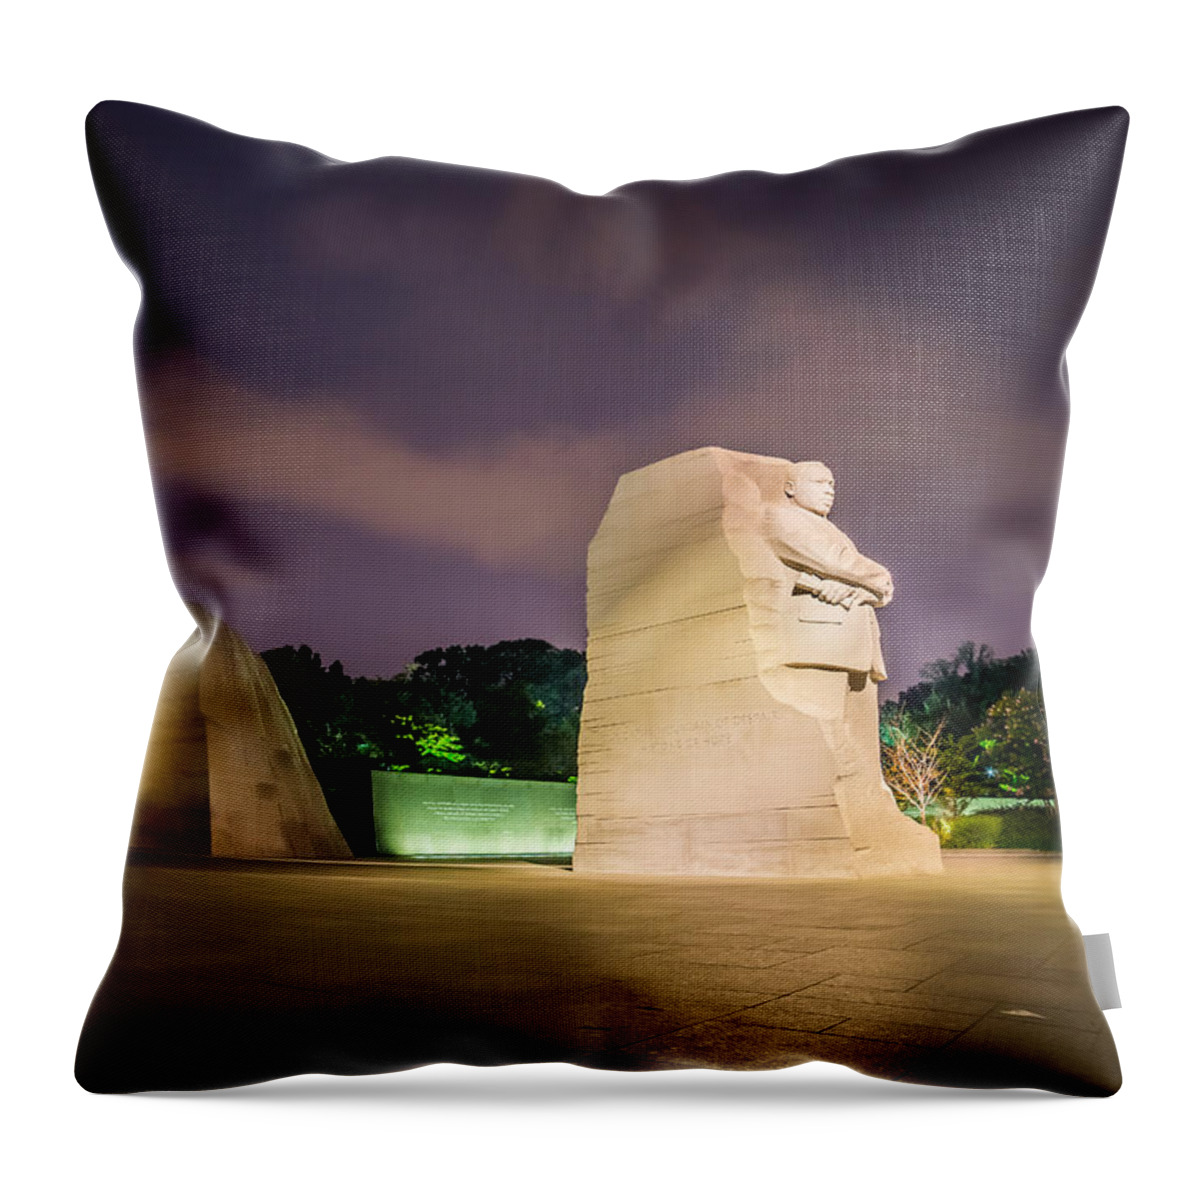 D.c. Throw Pillow featuring the photograph Martin Luther King Jr. Memorial by Chris Bordeleau